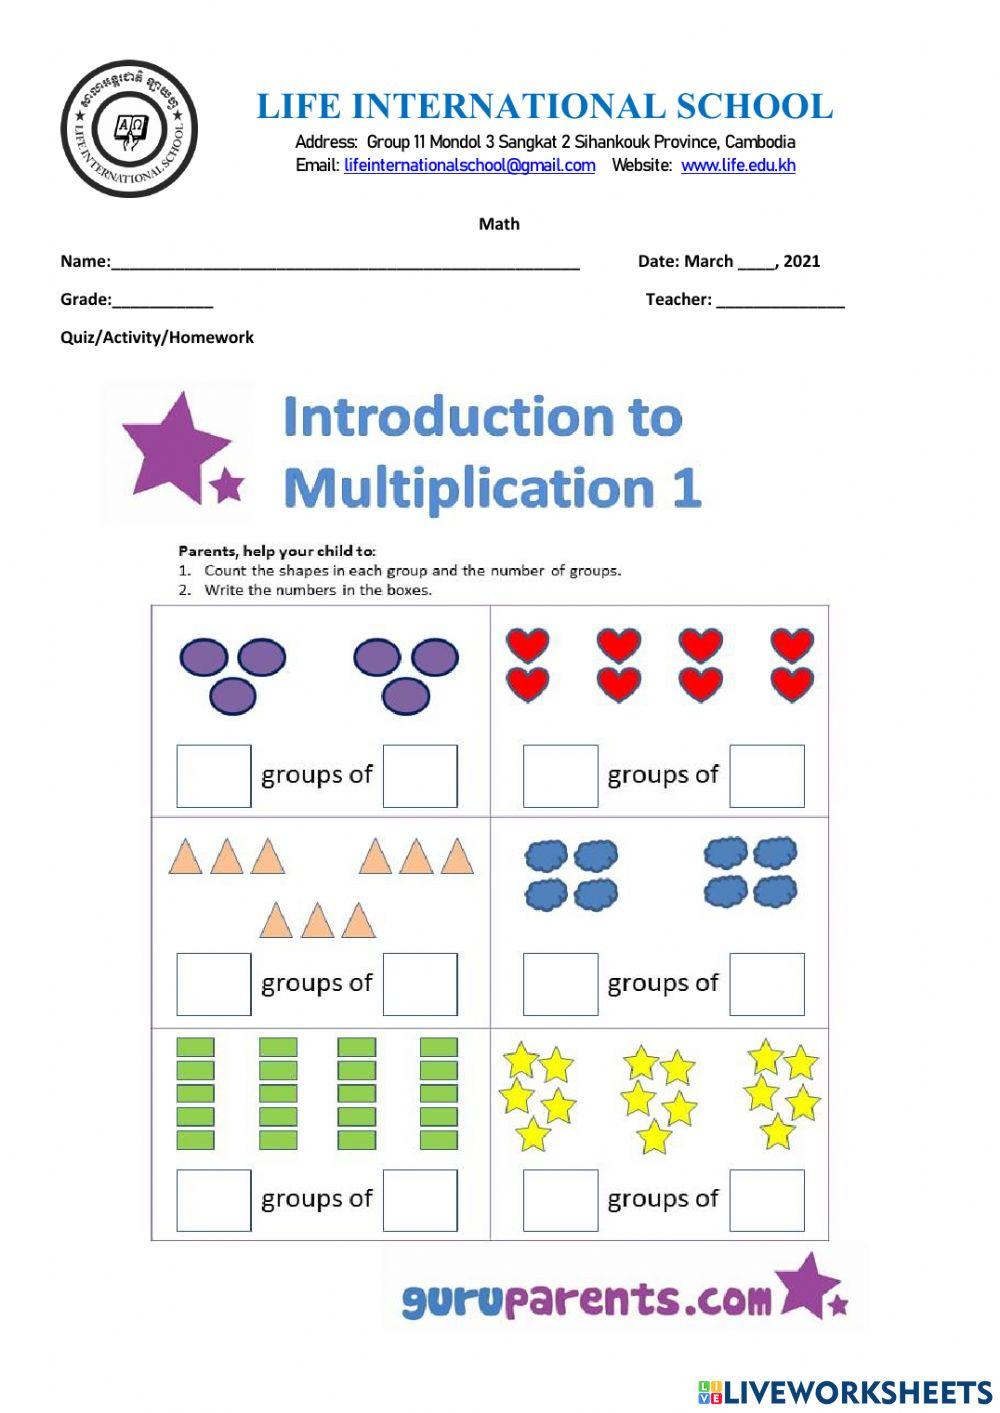 Concept of Multiplication - Group